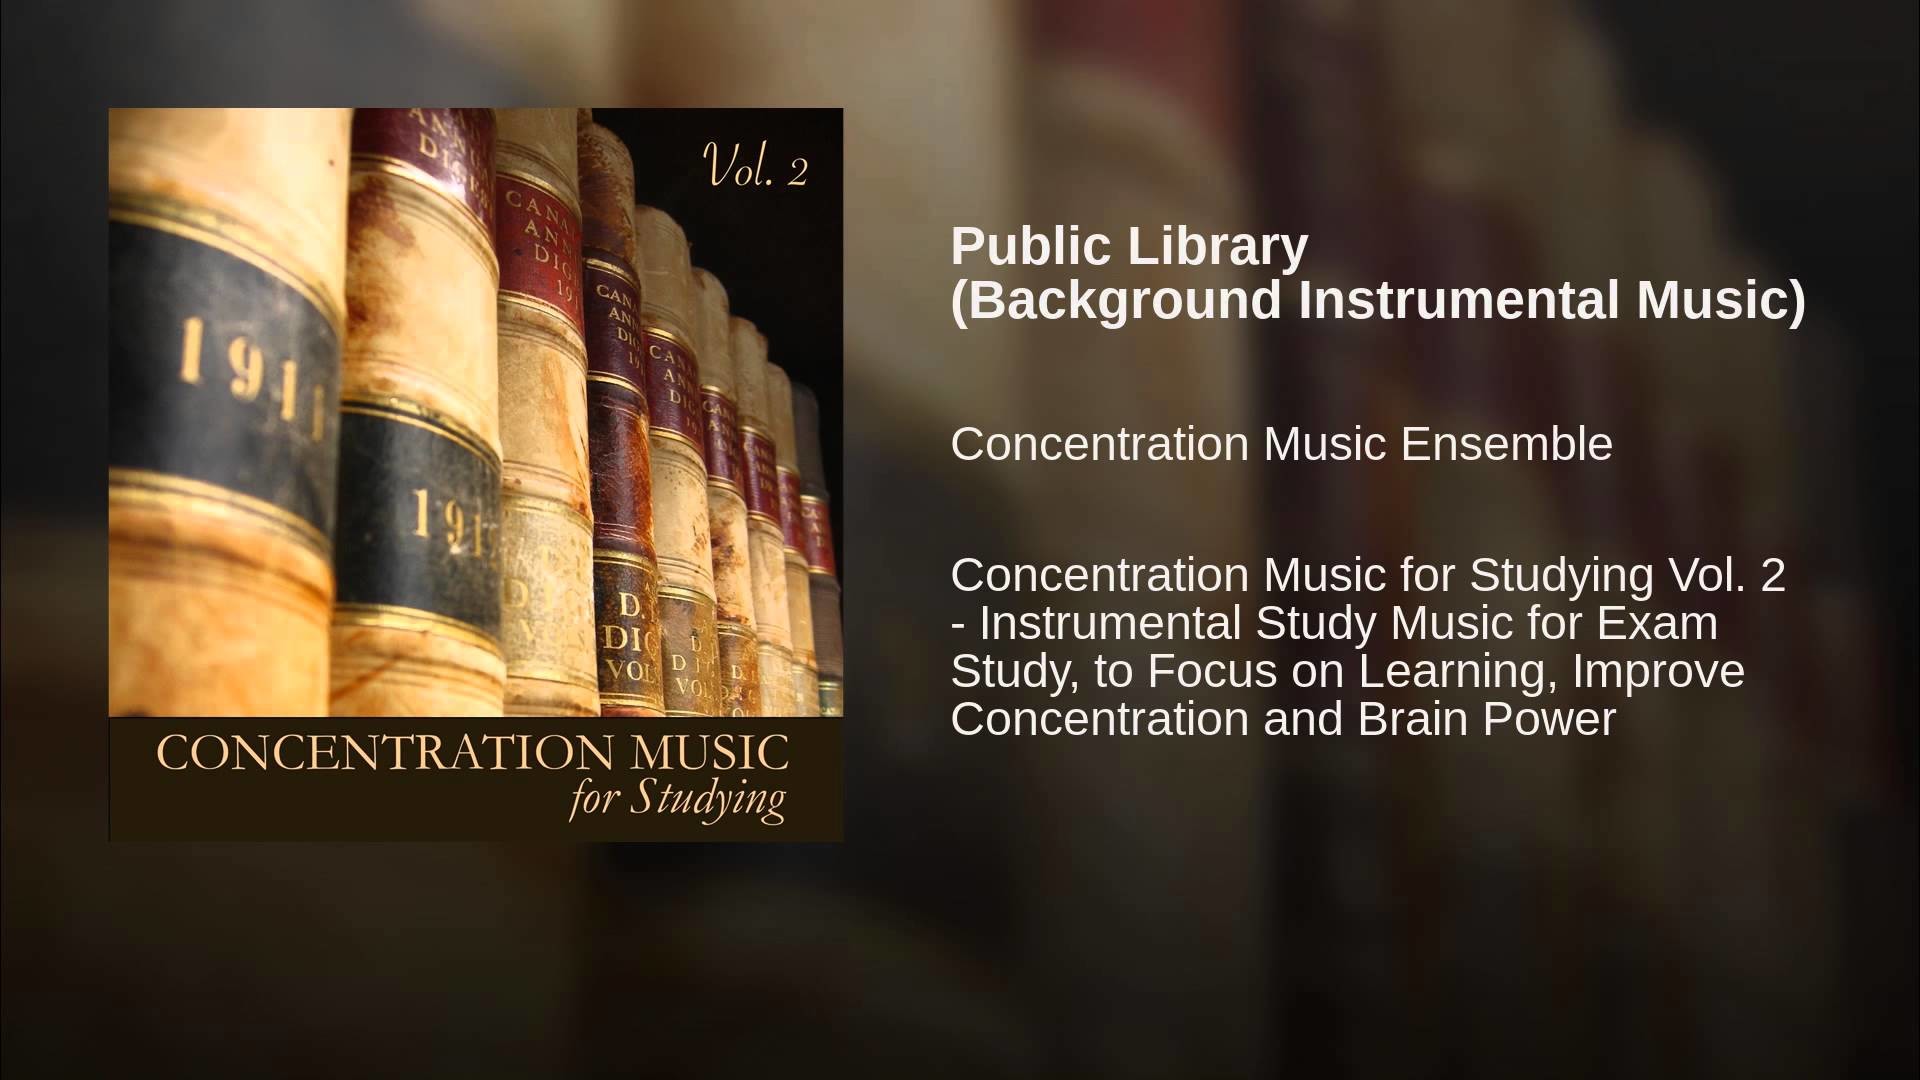 1920x1080 Public Library (Background Instrumental Music)